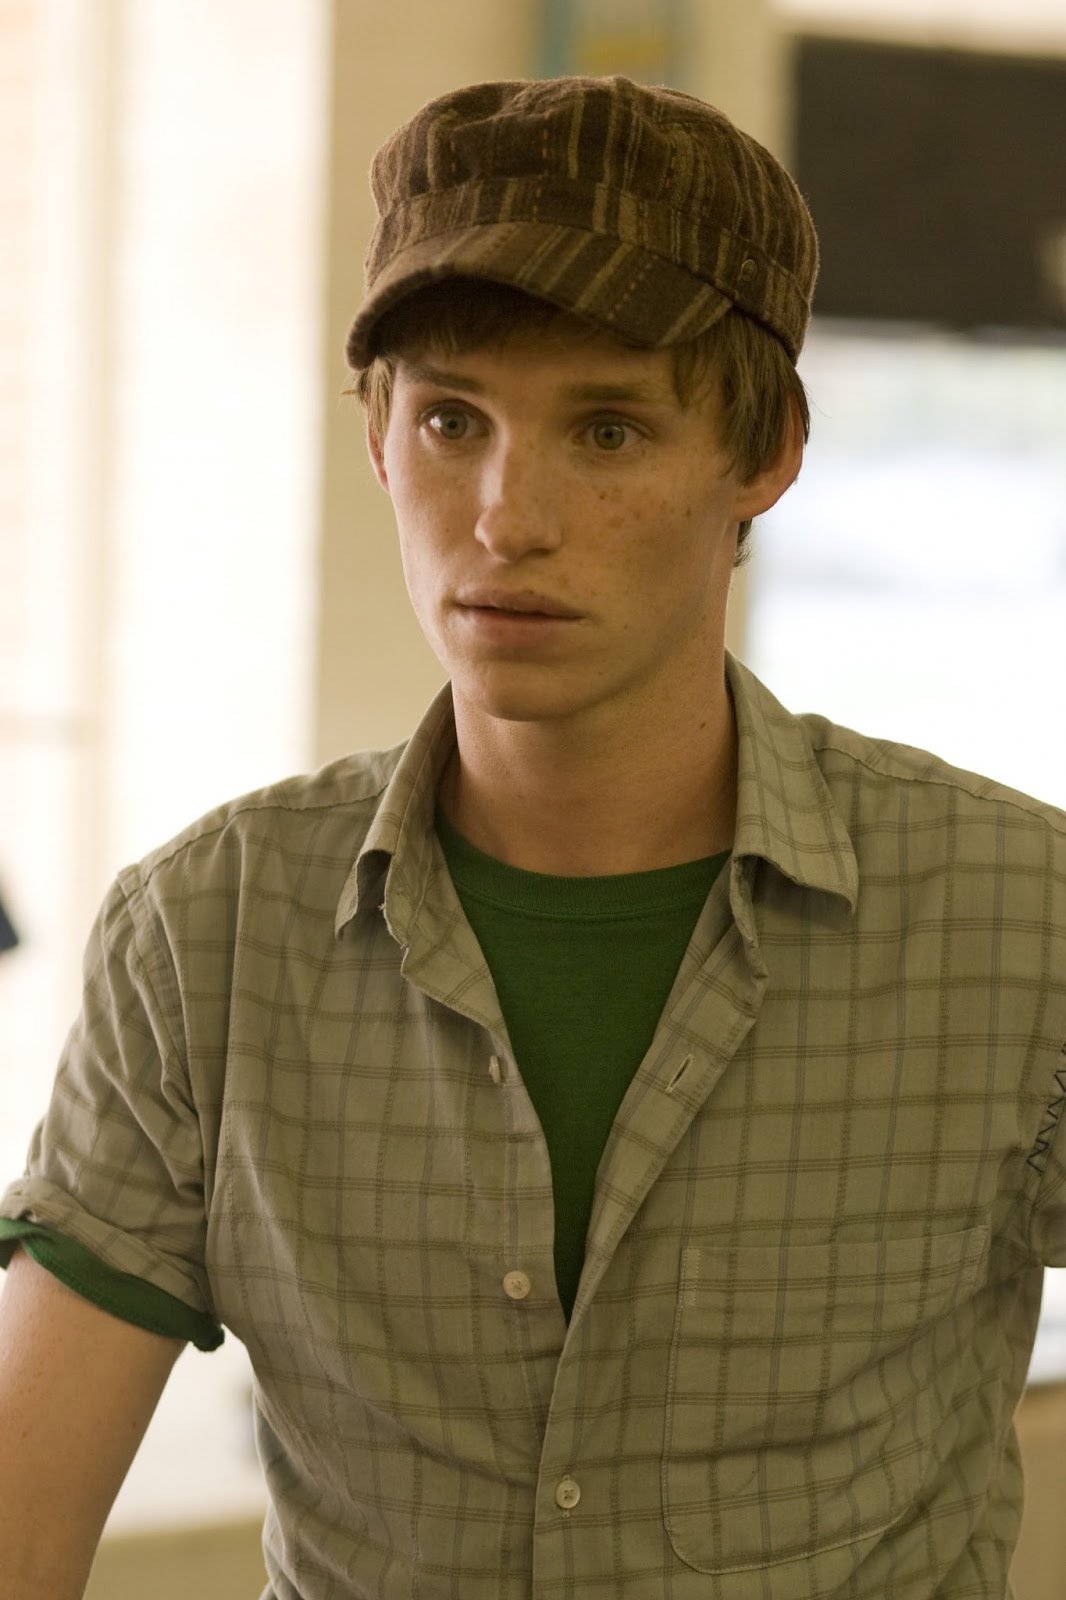 Addicted to Eddie: In honor of St. Patrick's Day - Eddie in green - photos